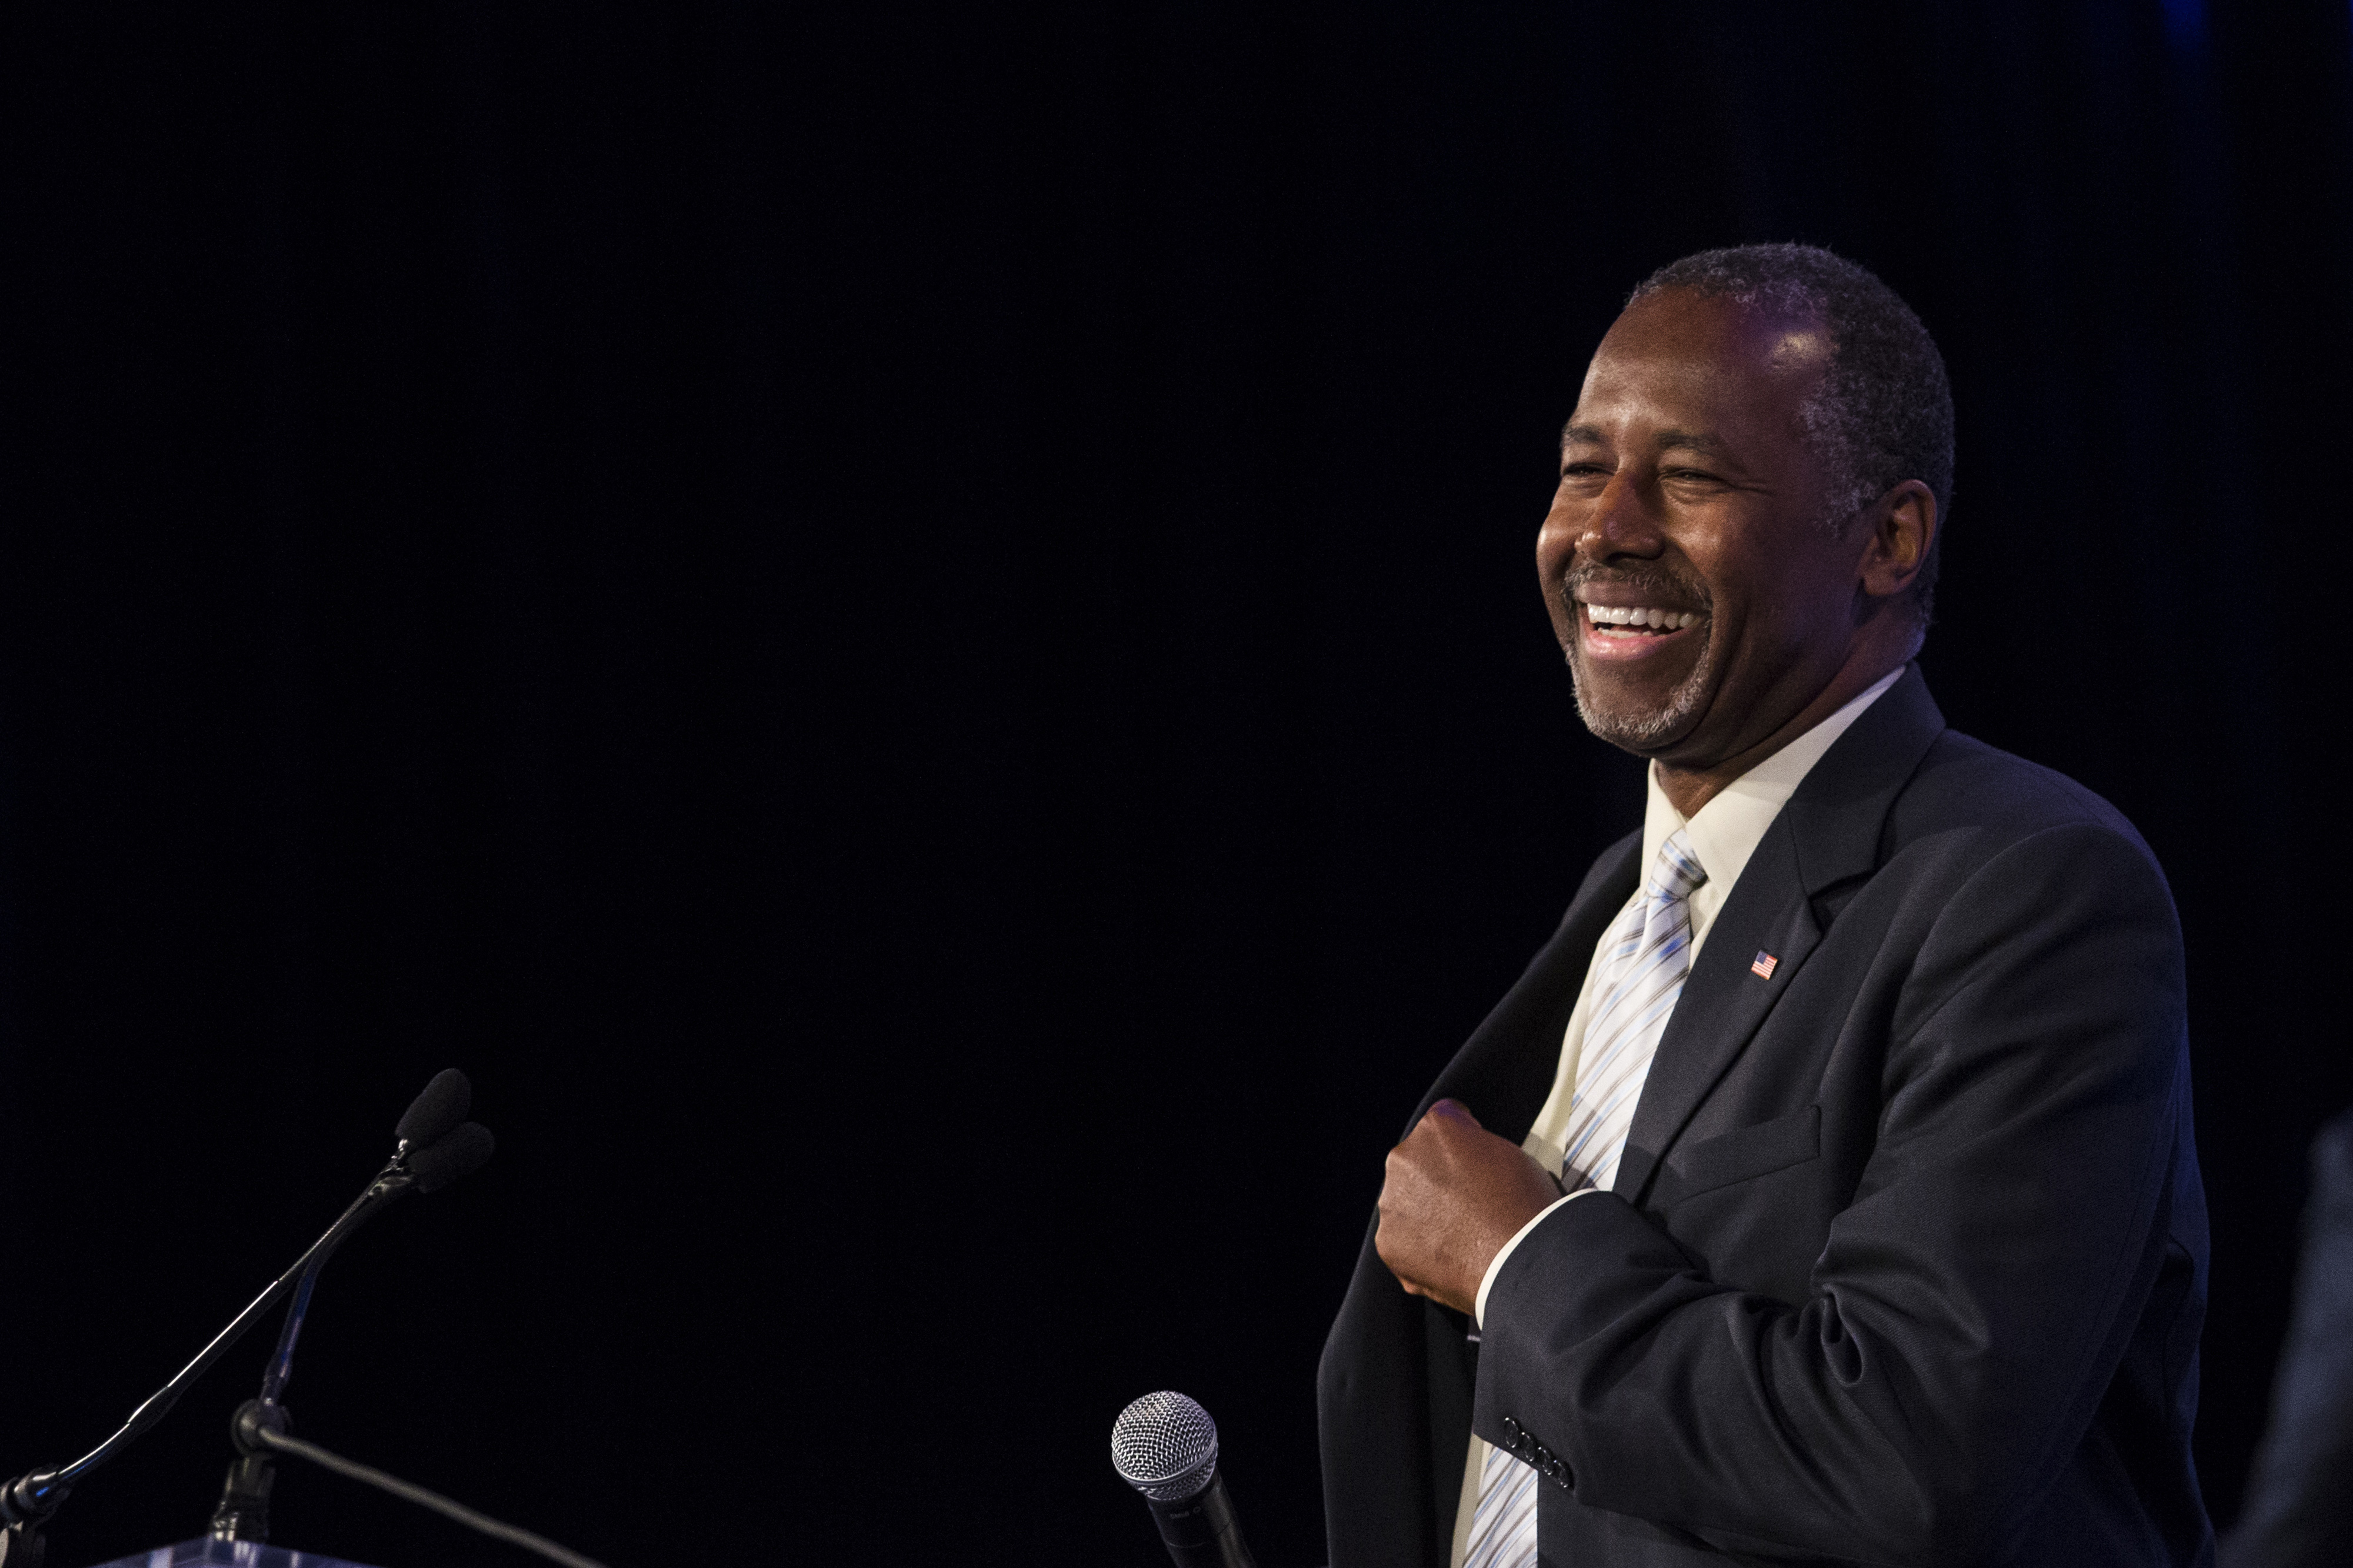 Ben Carson, 2016 Republican presidential candidate, smiles while arriving onstage to speak during the Values Voter Summit on Sept. 25, 2015 in Washington, D.C. (Bloomberg via Getty Images)